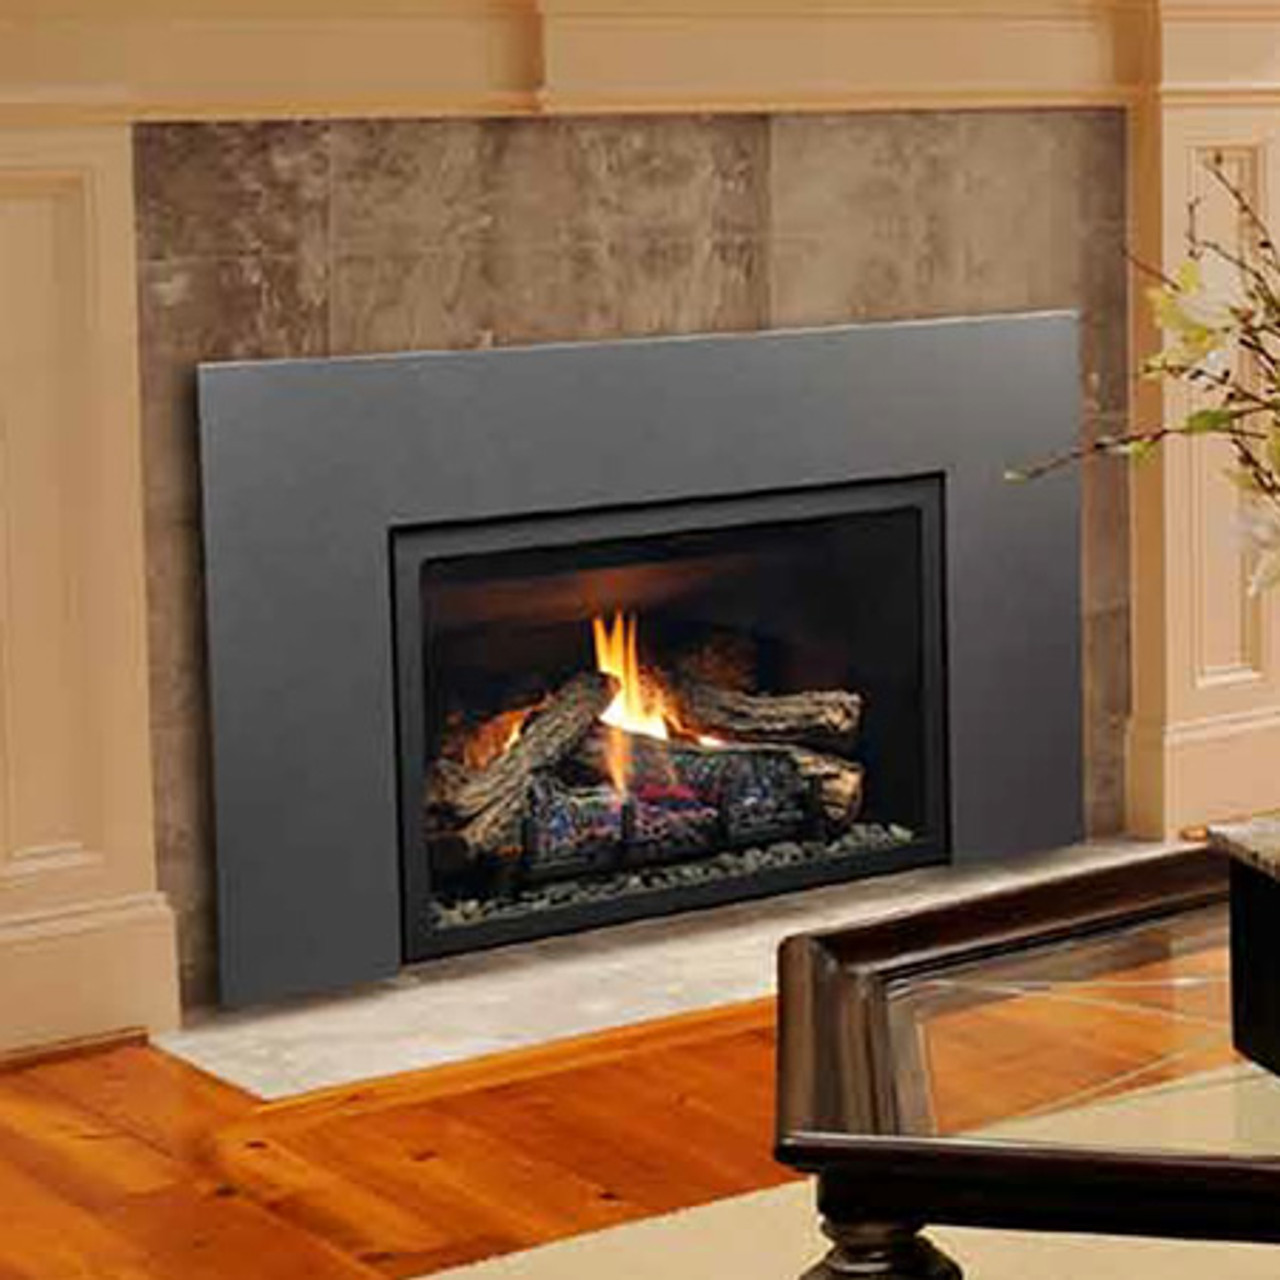 The Best Guide To Ventless Gas Fireplace Inserts